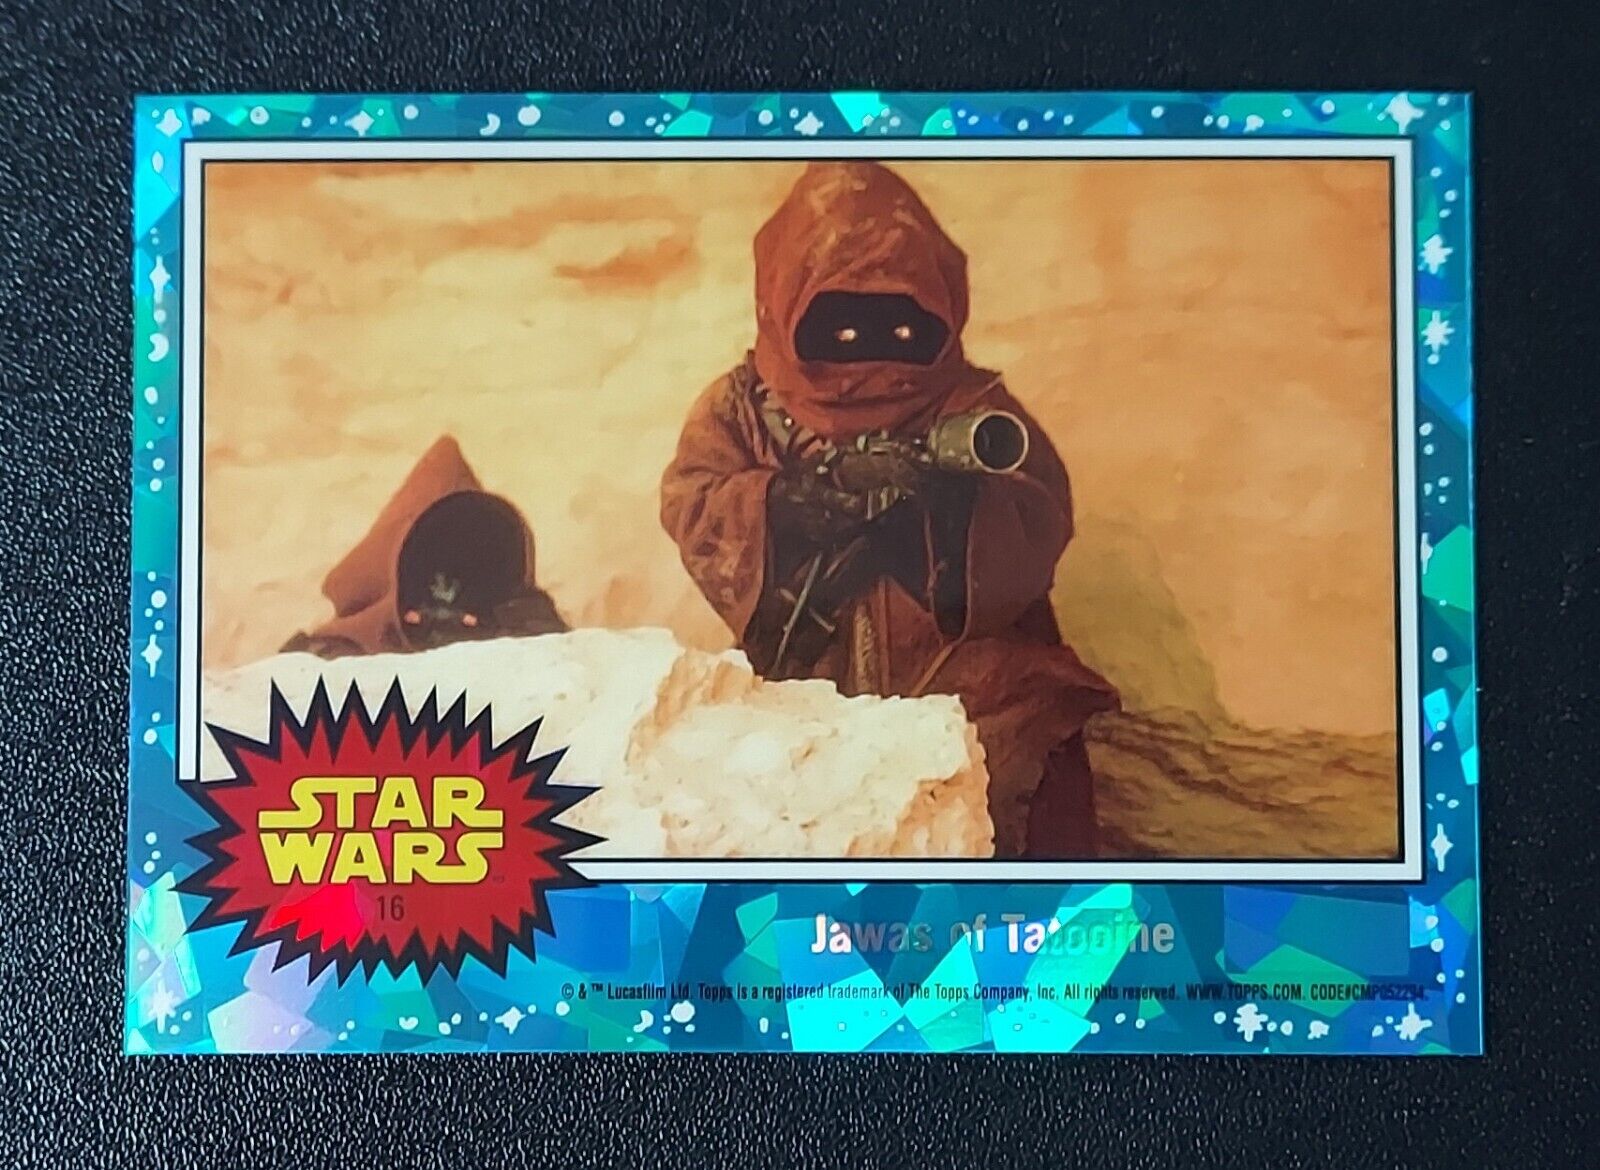 2022 Topps Chrome Star Wars Jawas of Tatooine #16 MINT Vintage trading card